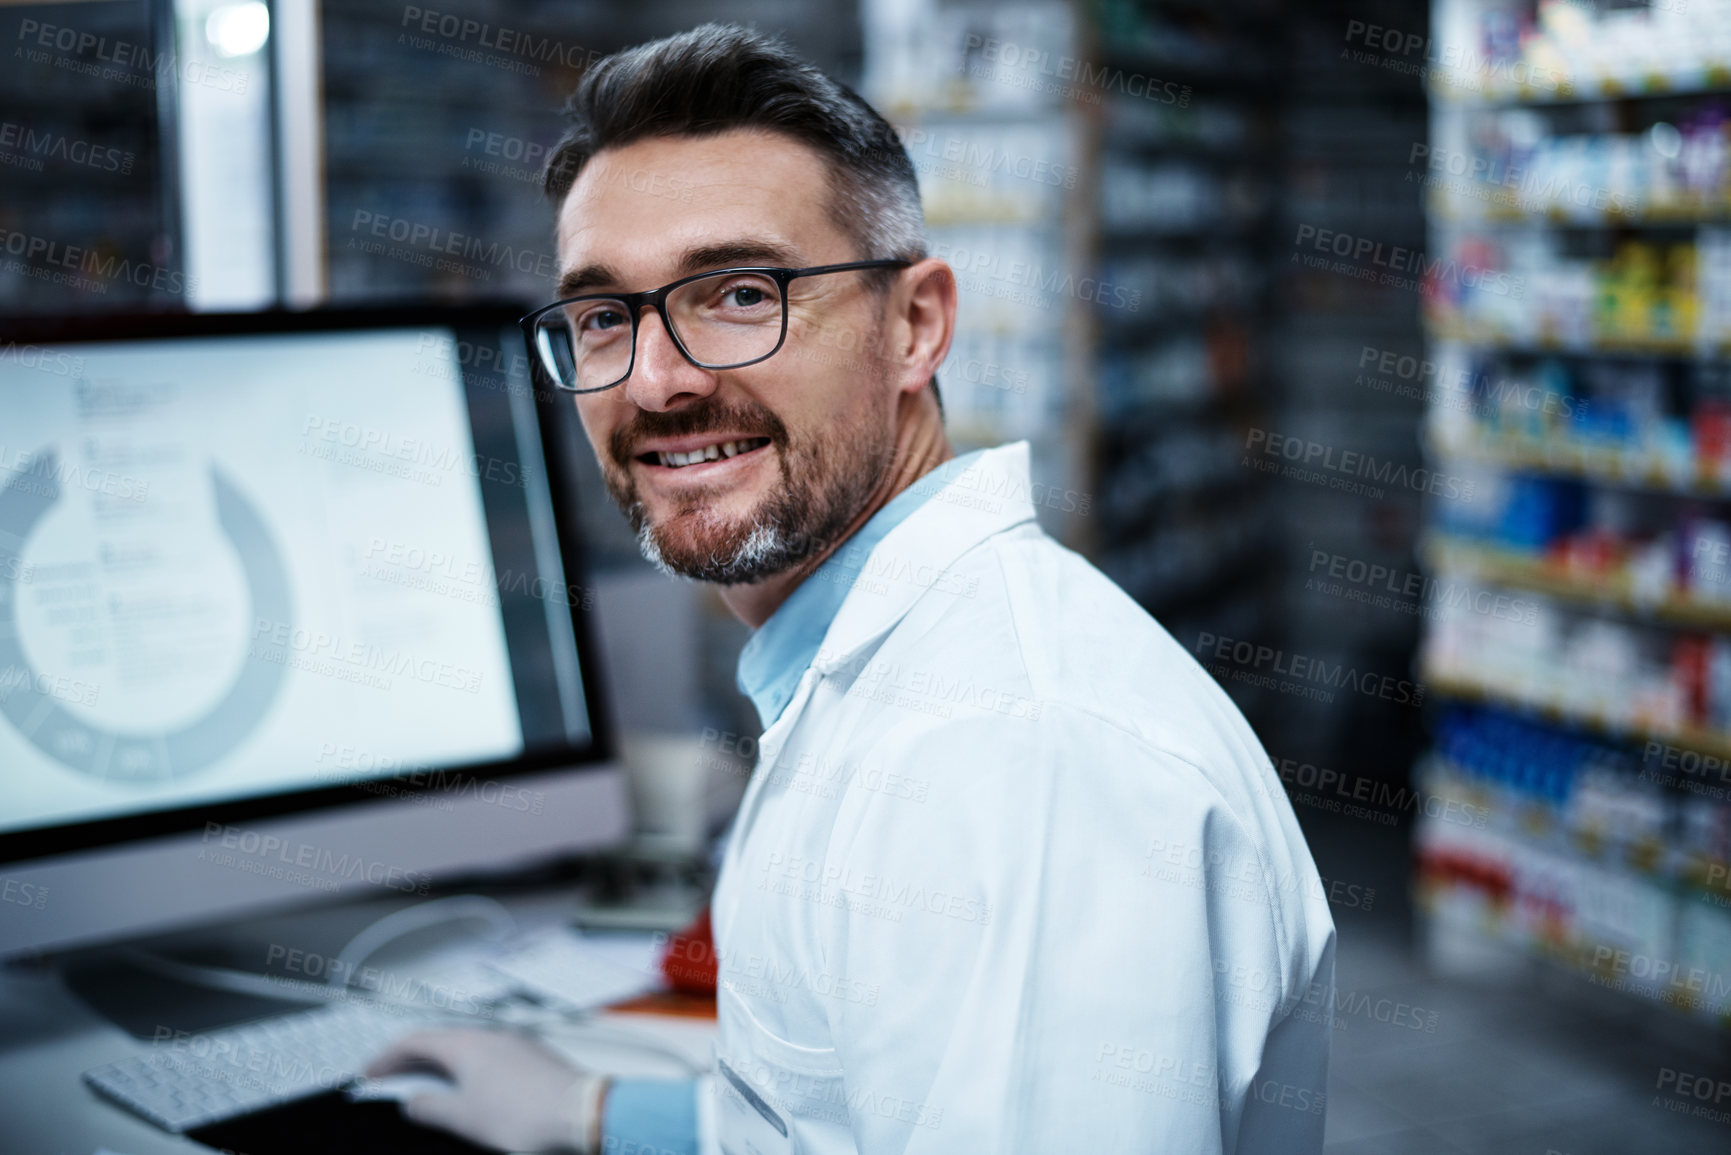 Buy stock photo Shot of a mature man using a computer while working in a pharmacy